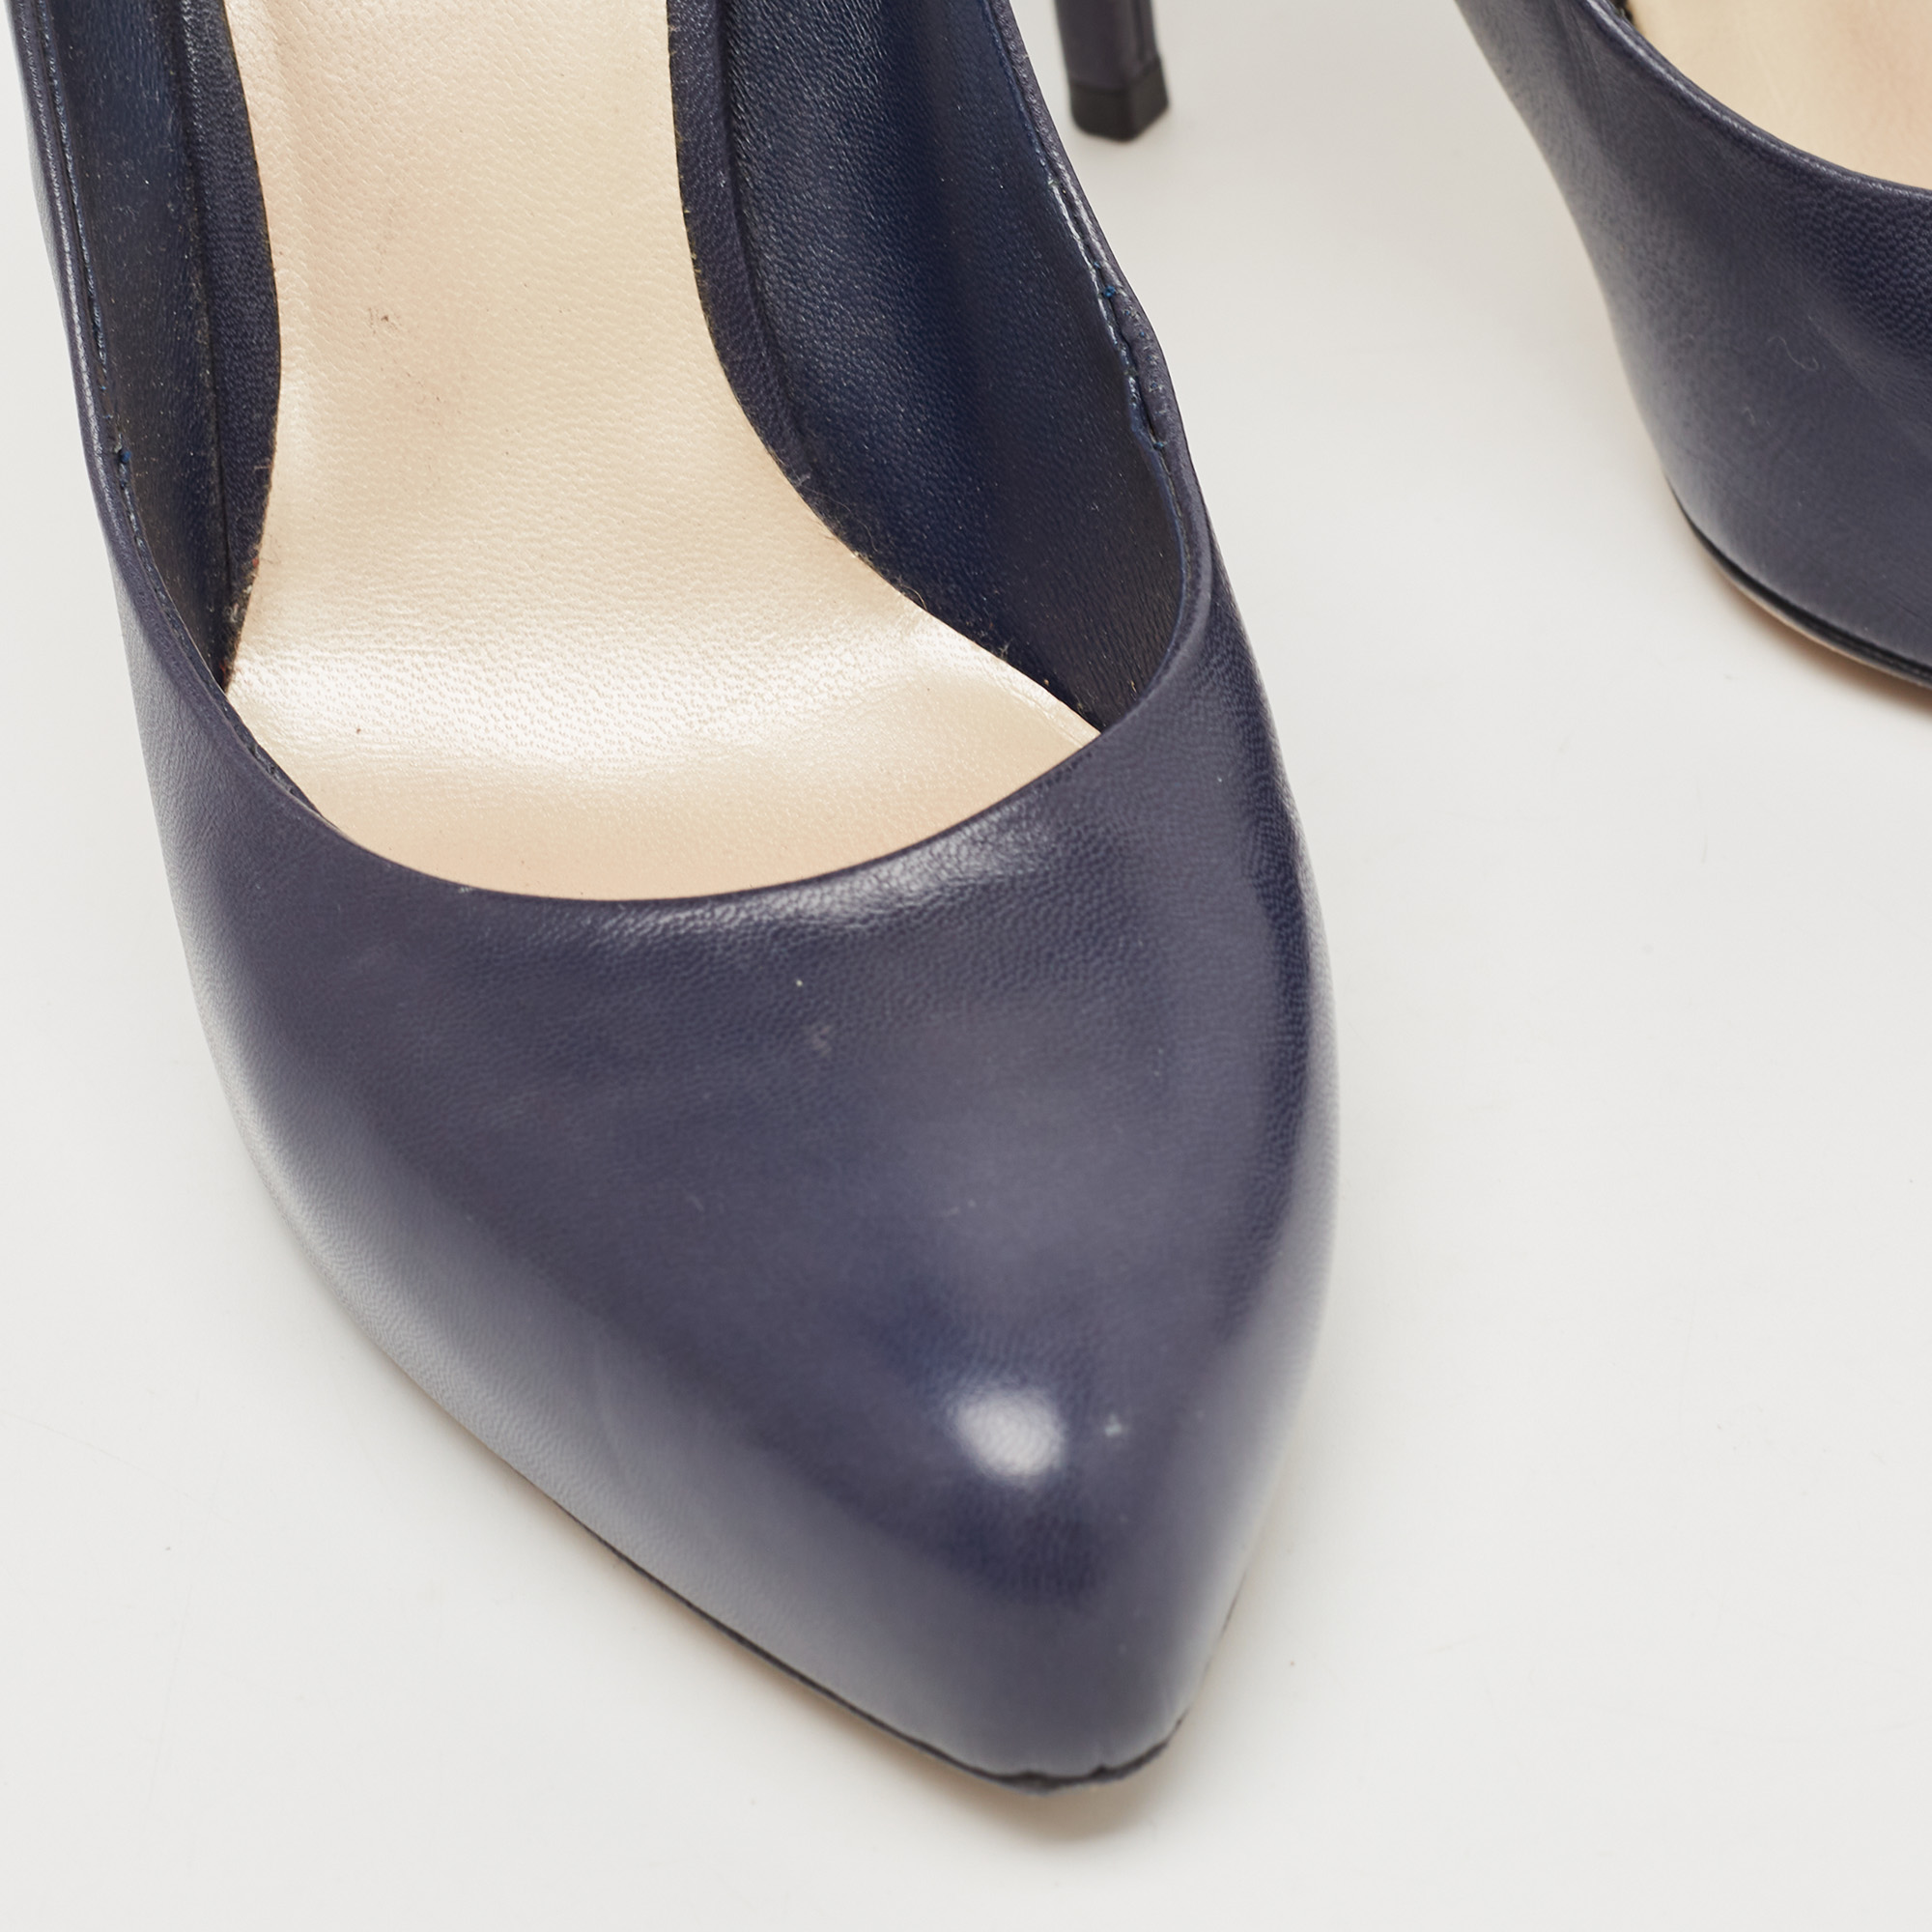 Dior Navy Blue Leather Pumps Size 39